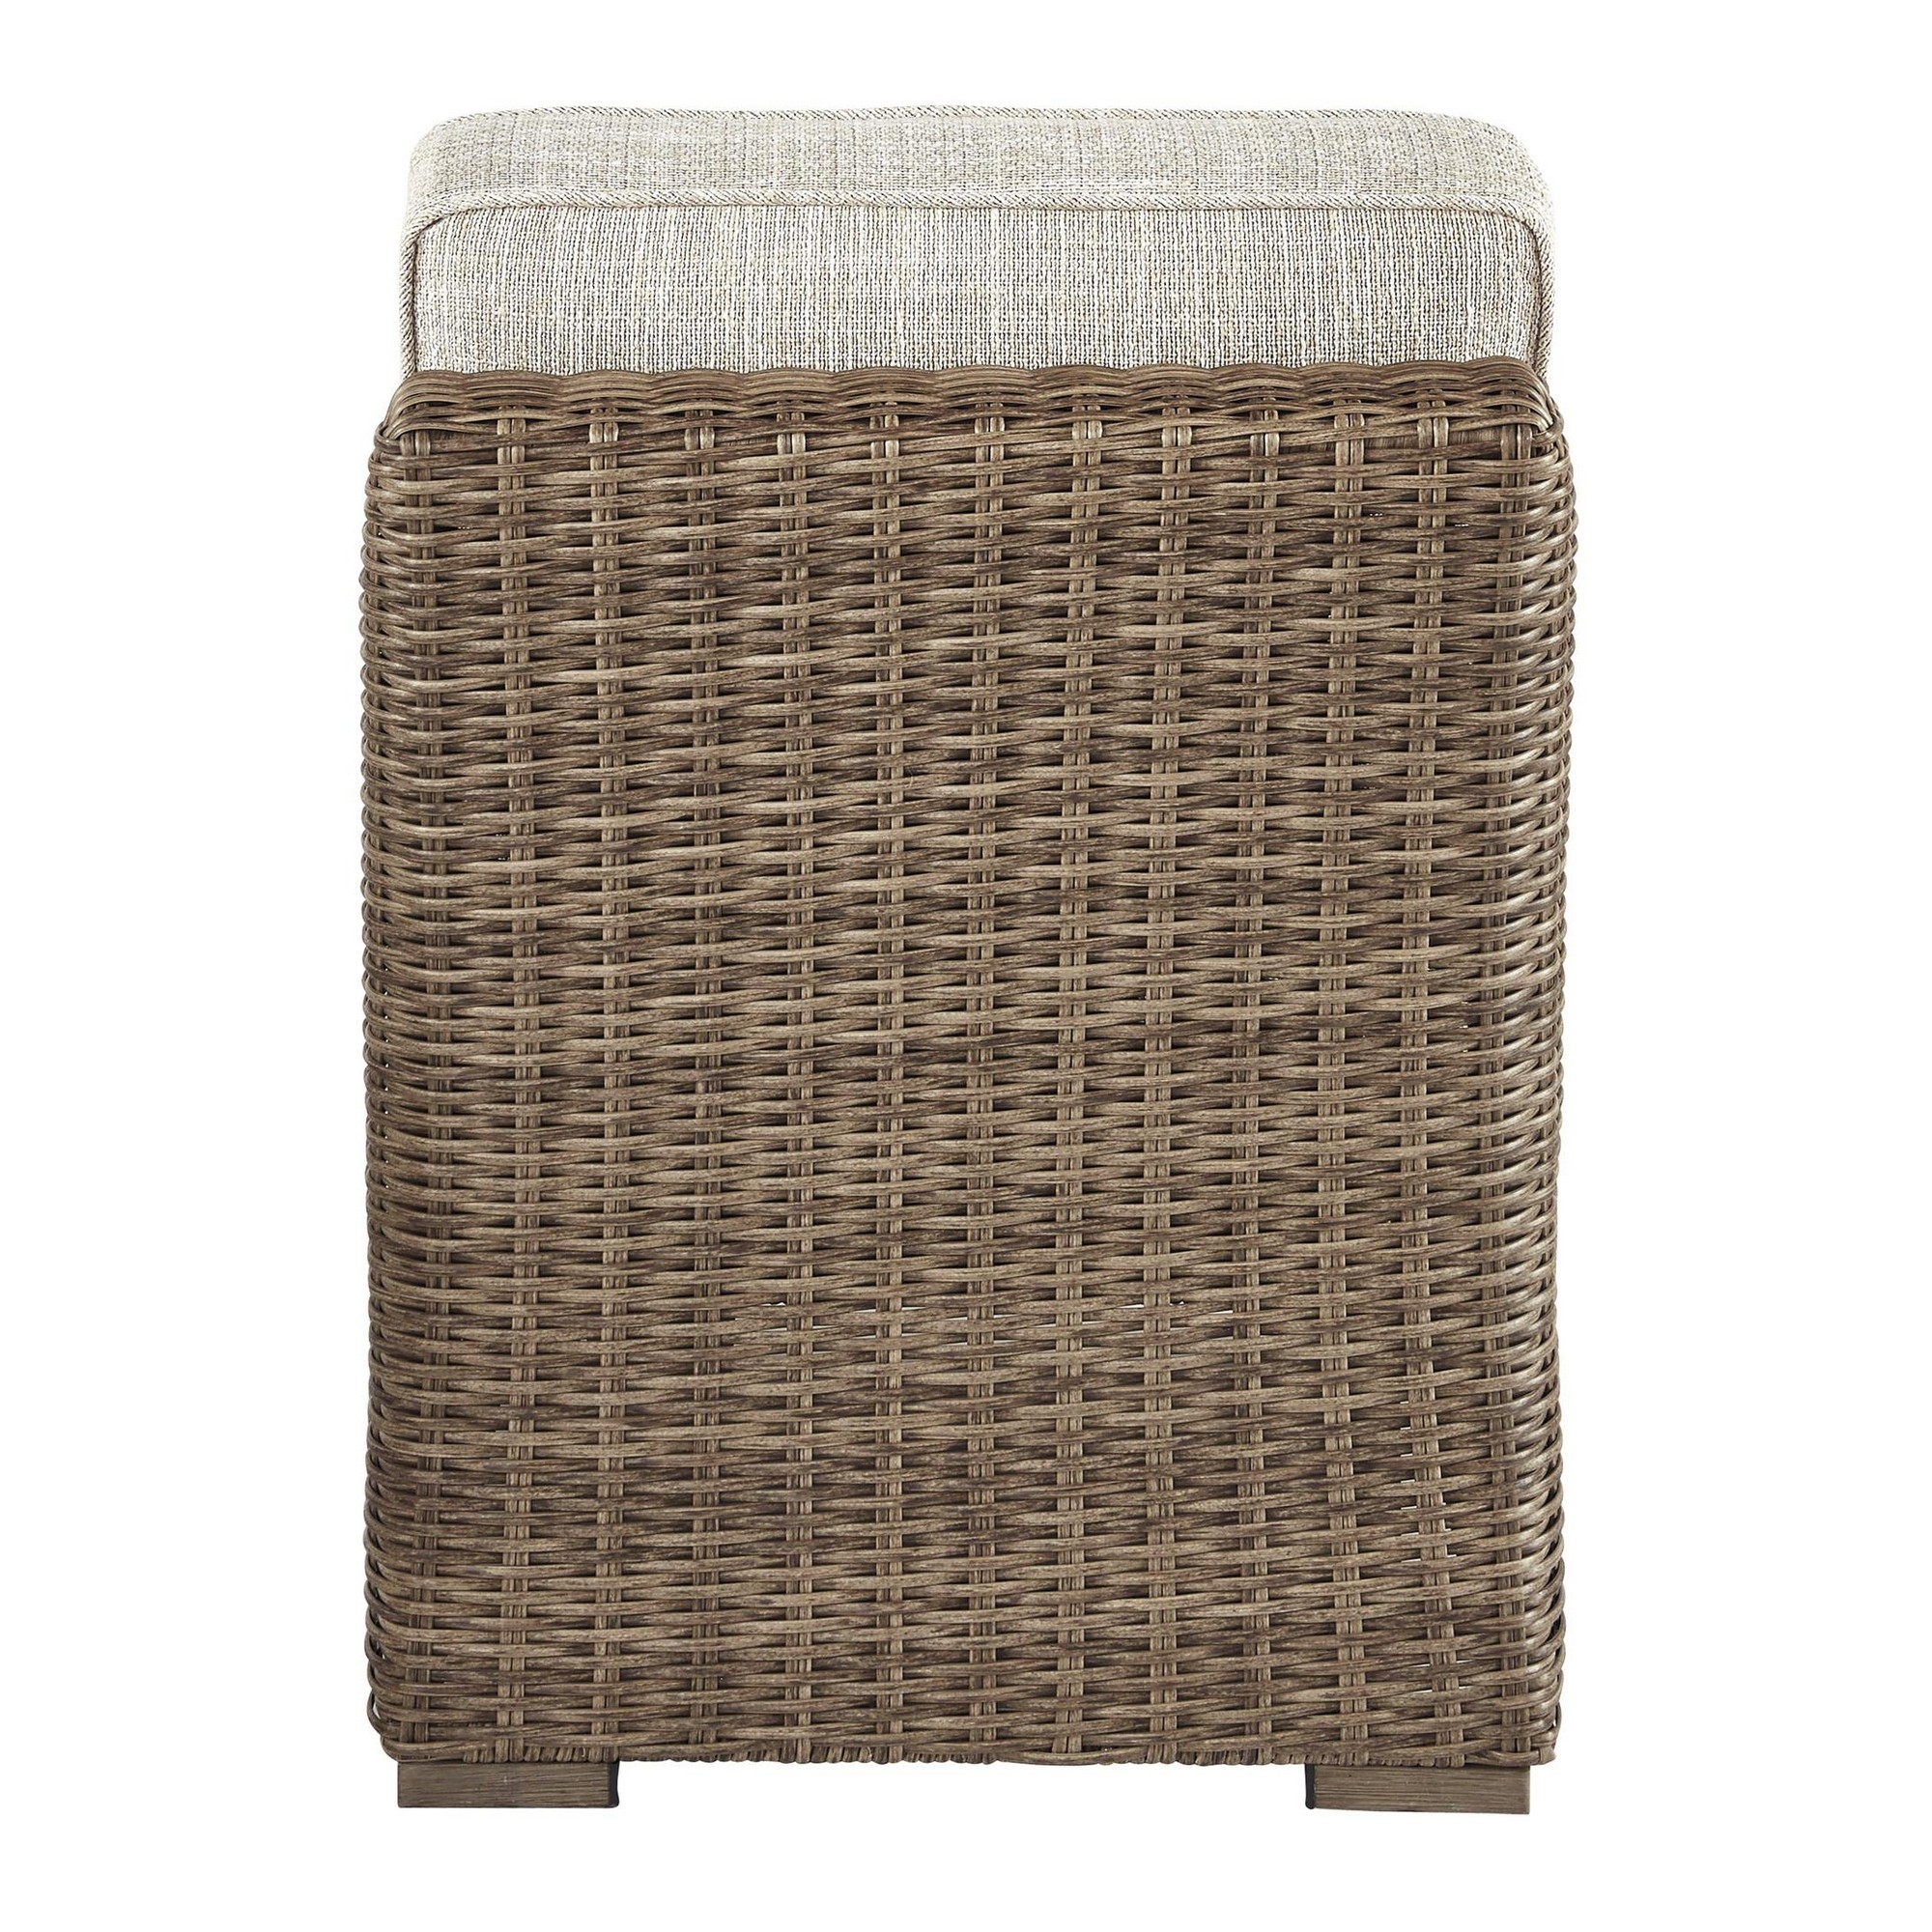 Handwoven Wicker Frame Fabric Upholstered Armless Chair, Beige And Brown- Saltoro Sherpi